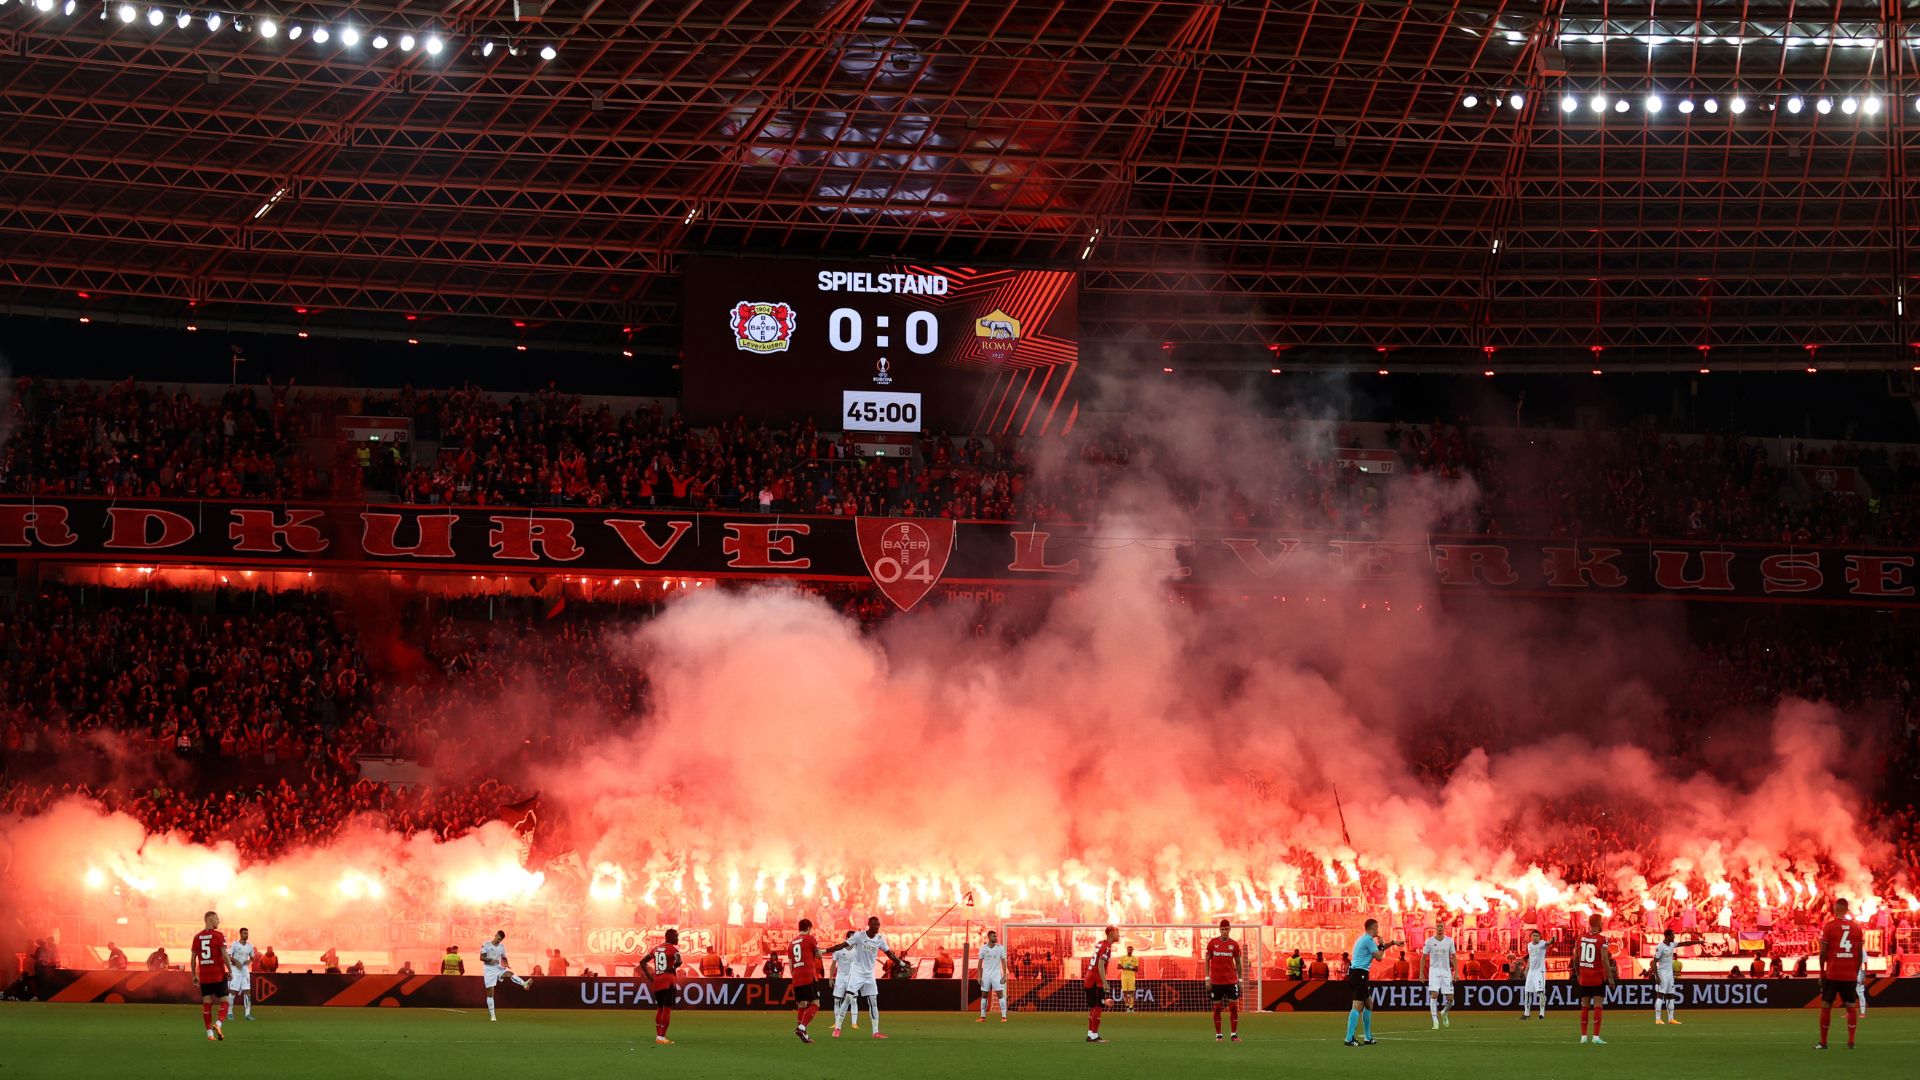 Bayer Leverkusen v Roma was stopped due to flares in the stands (Credit: Getty Images)